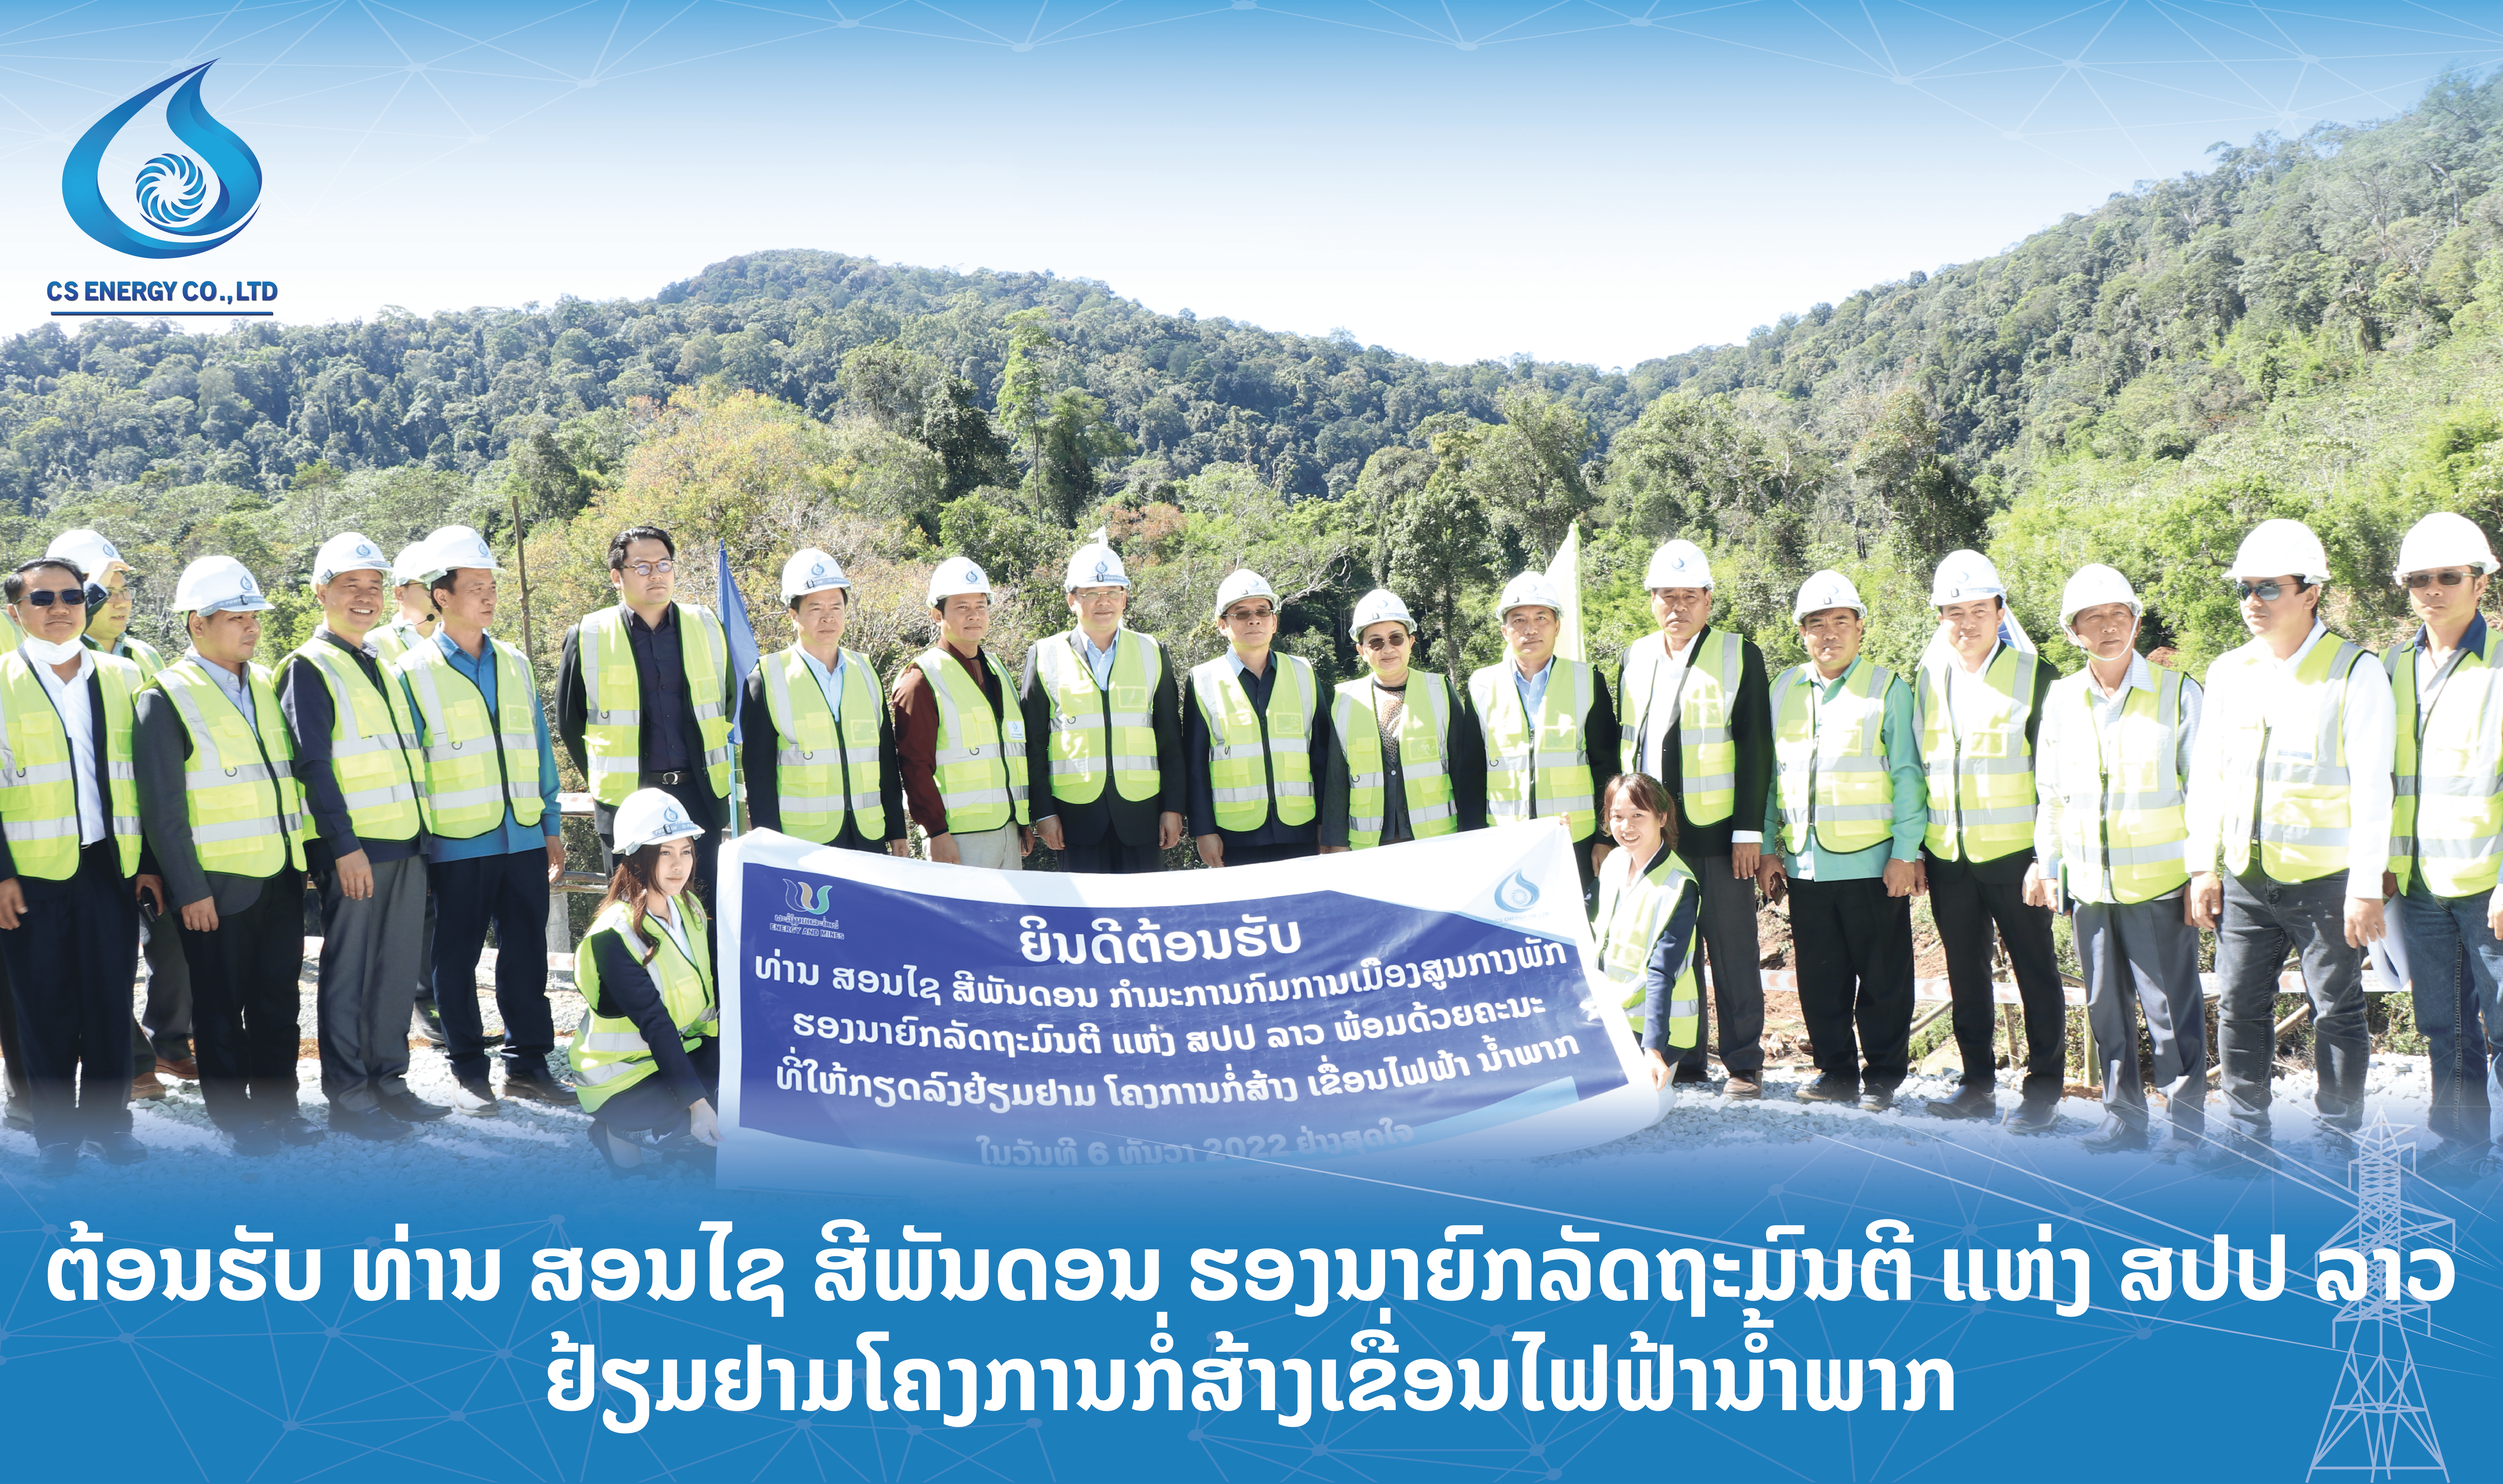 Welcoming Mr. Sonexay SIPHANDONE, Deputy Prime Minister of the Lao PDR for his visit Hydroelectric dam construction project